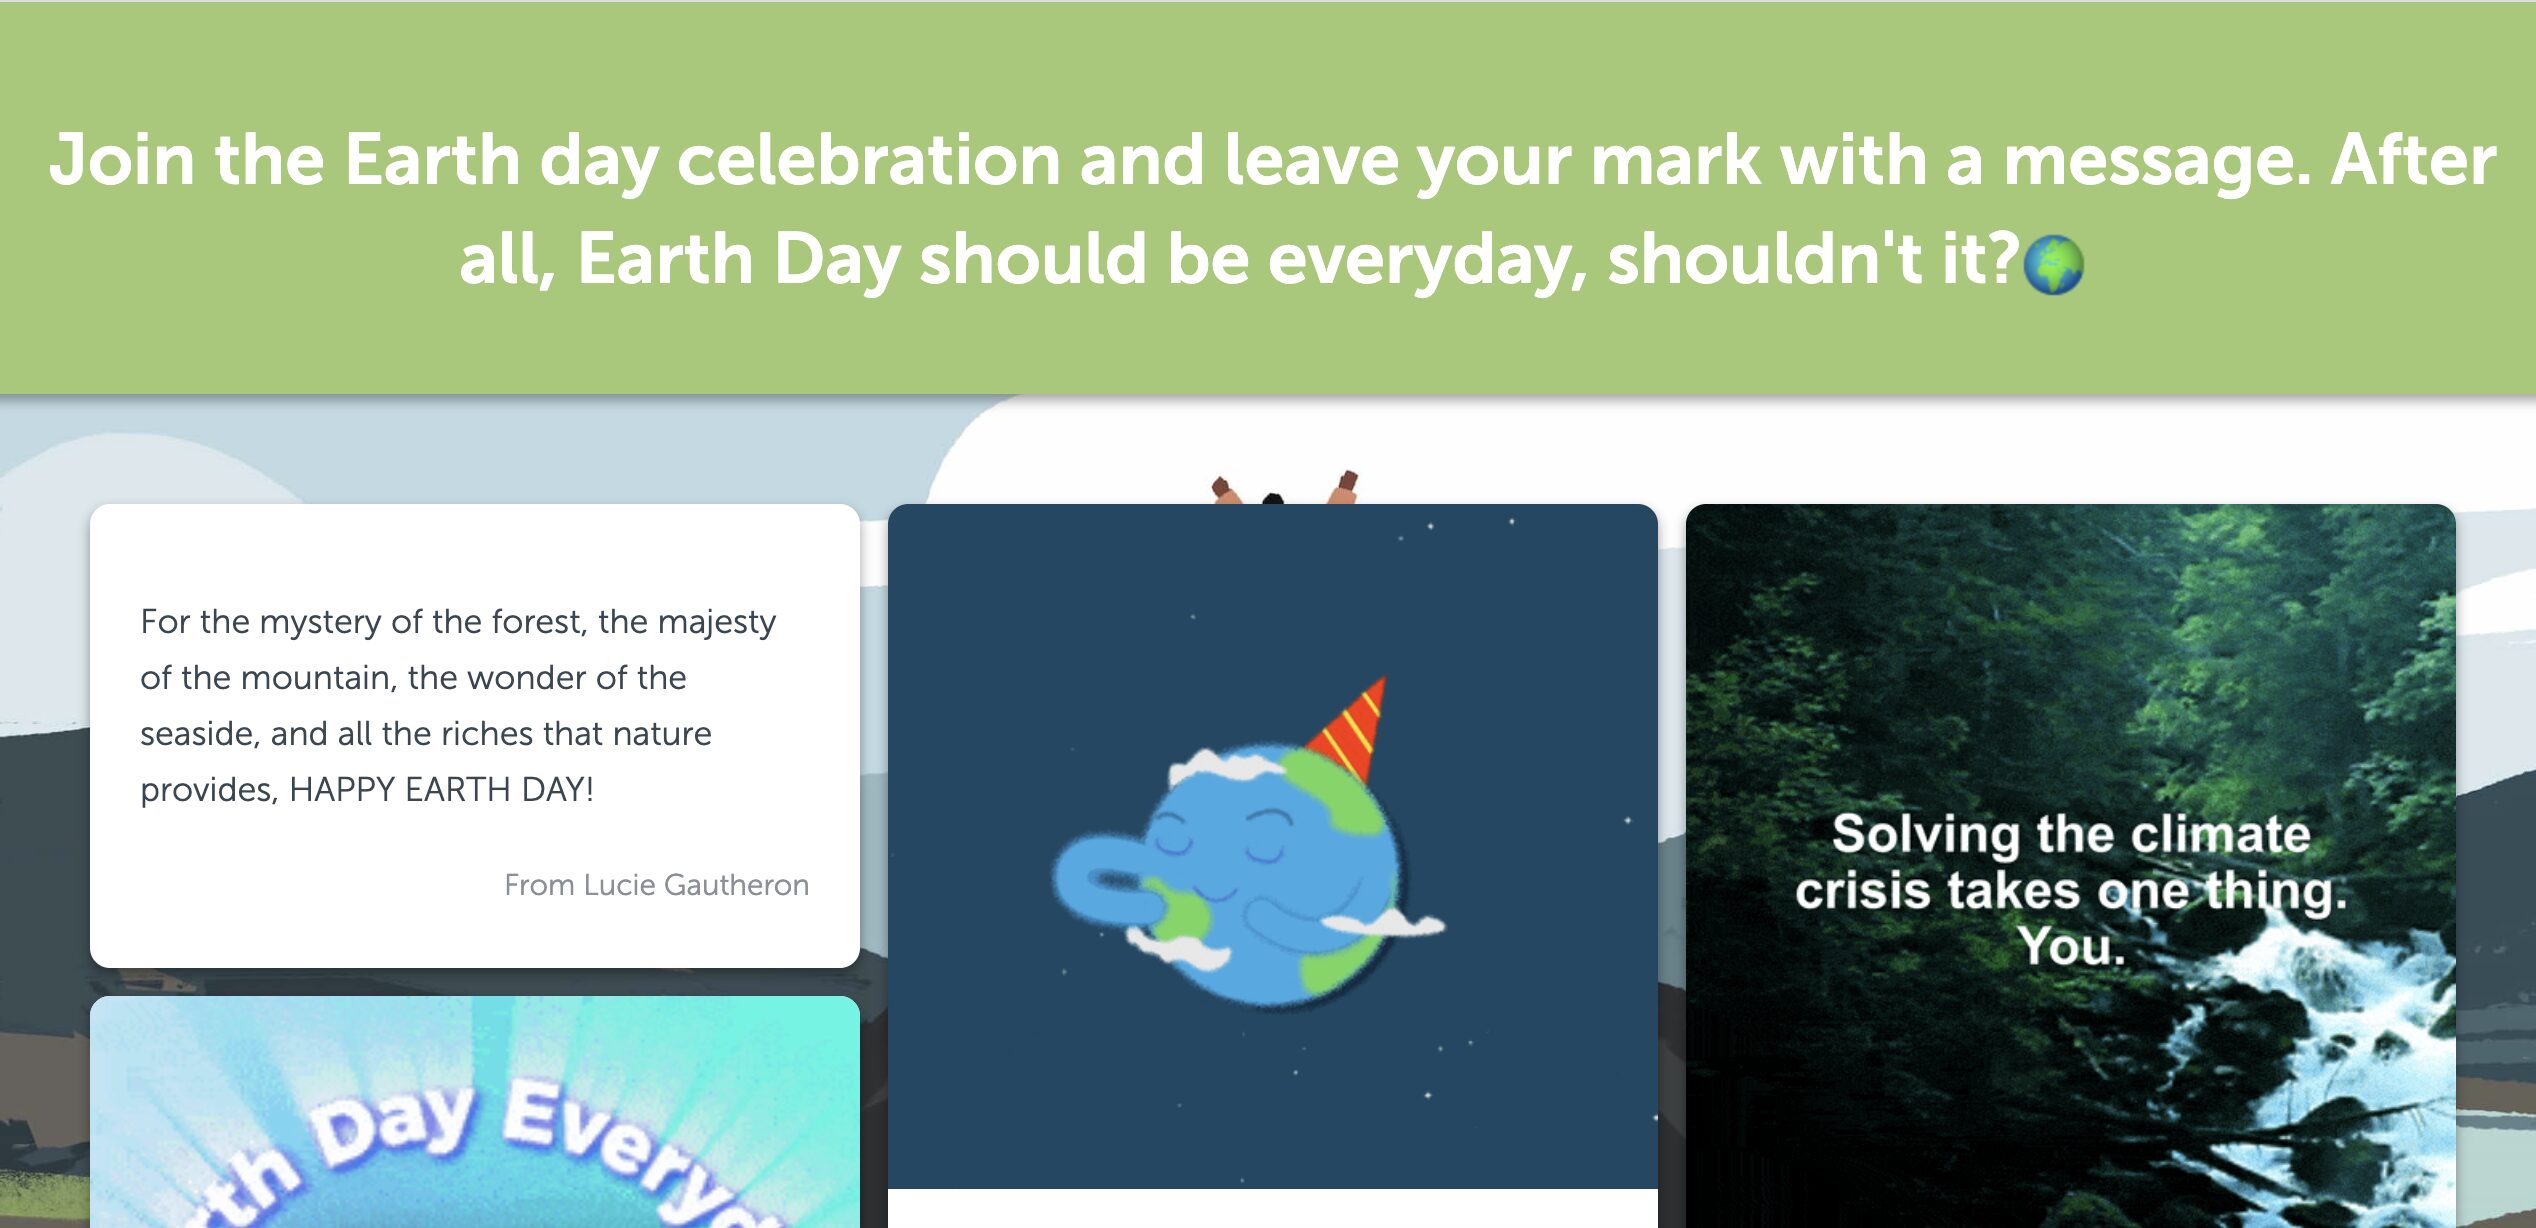 Event board full of Earth Day quotes and messages